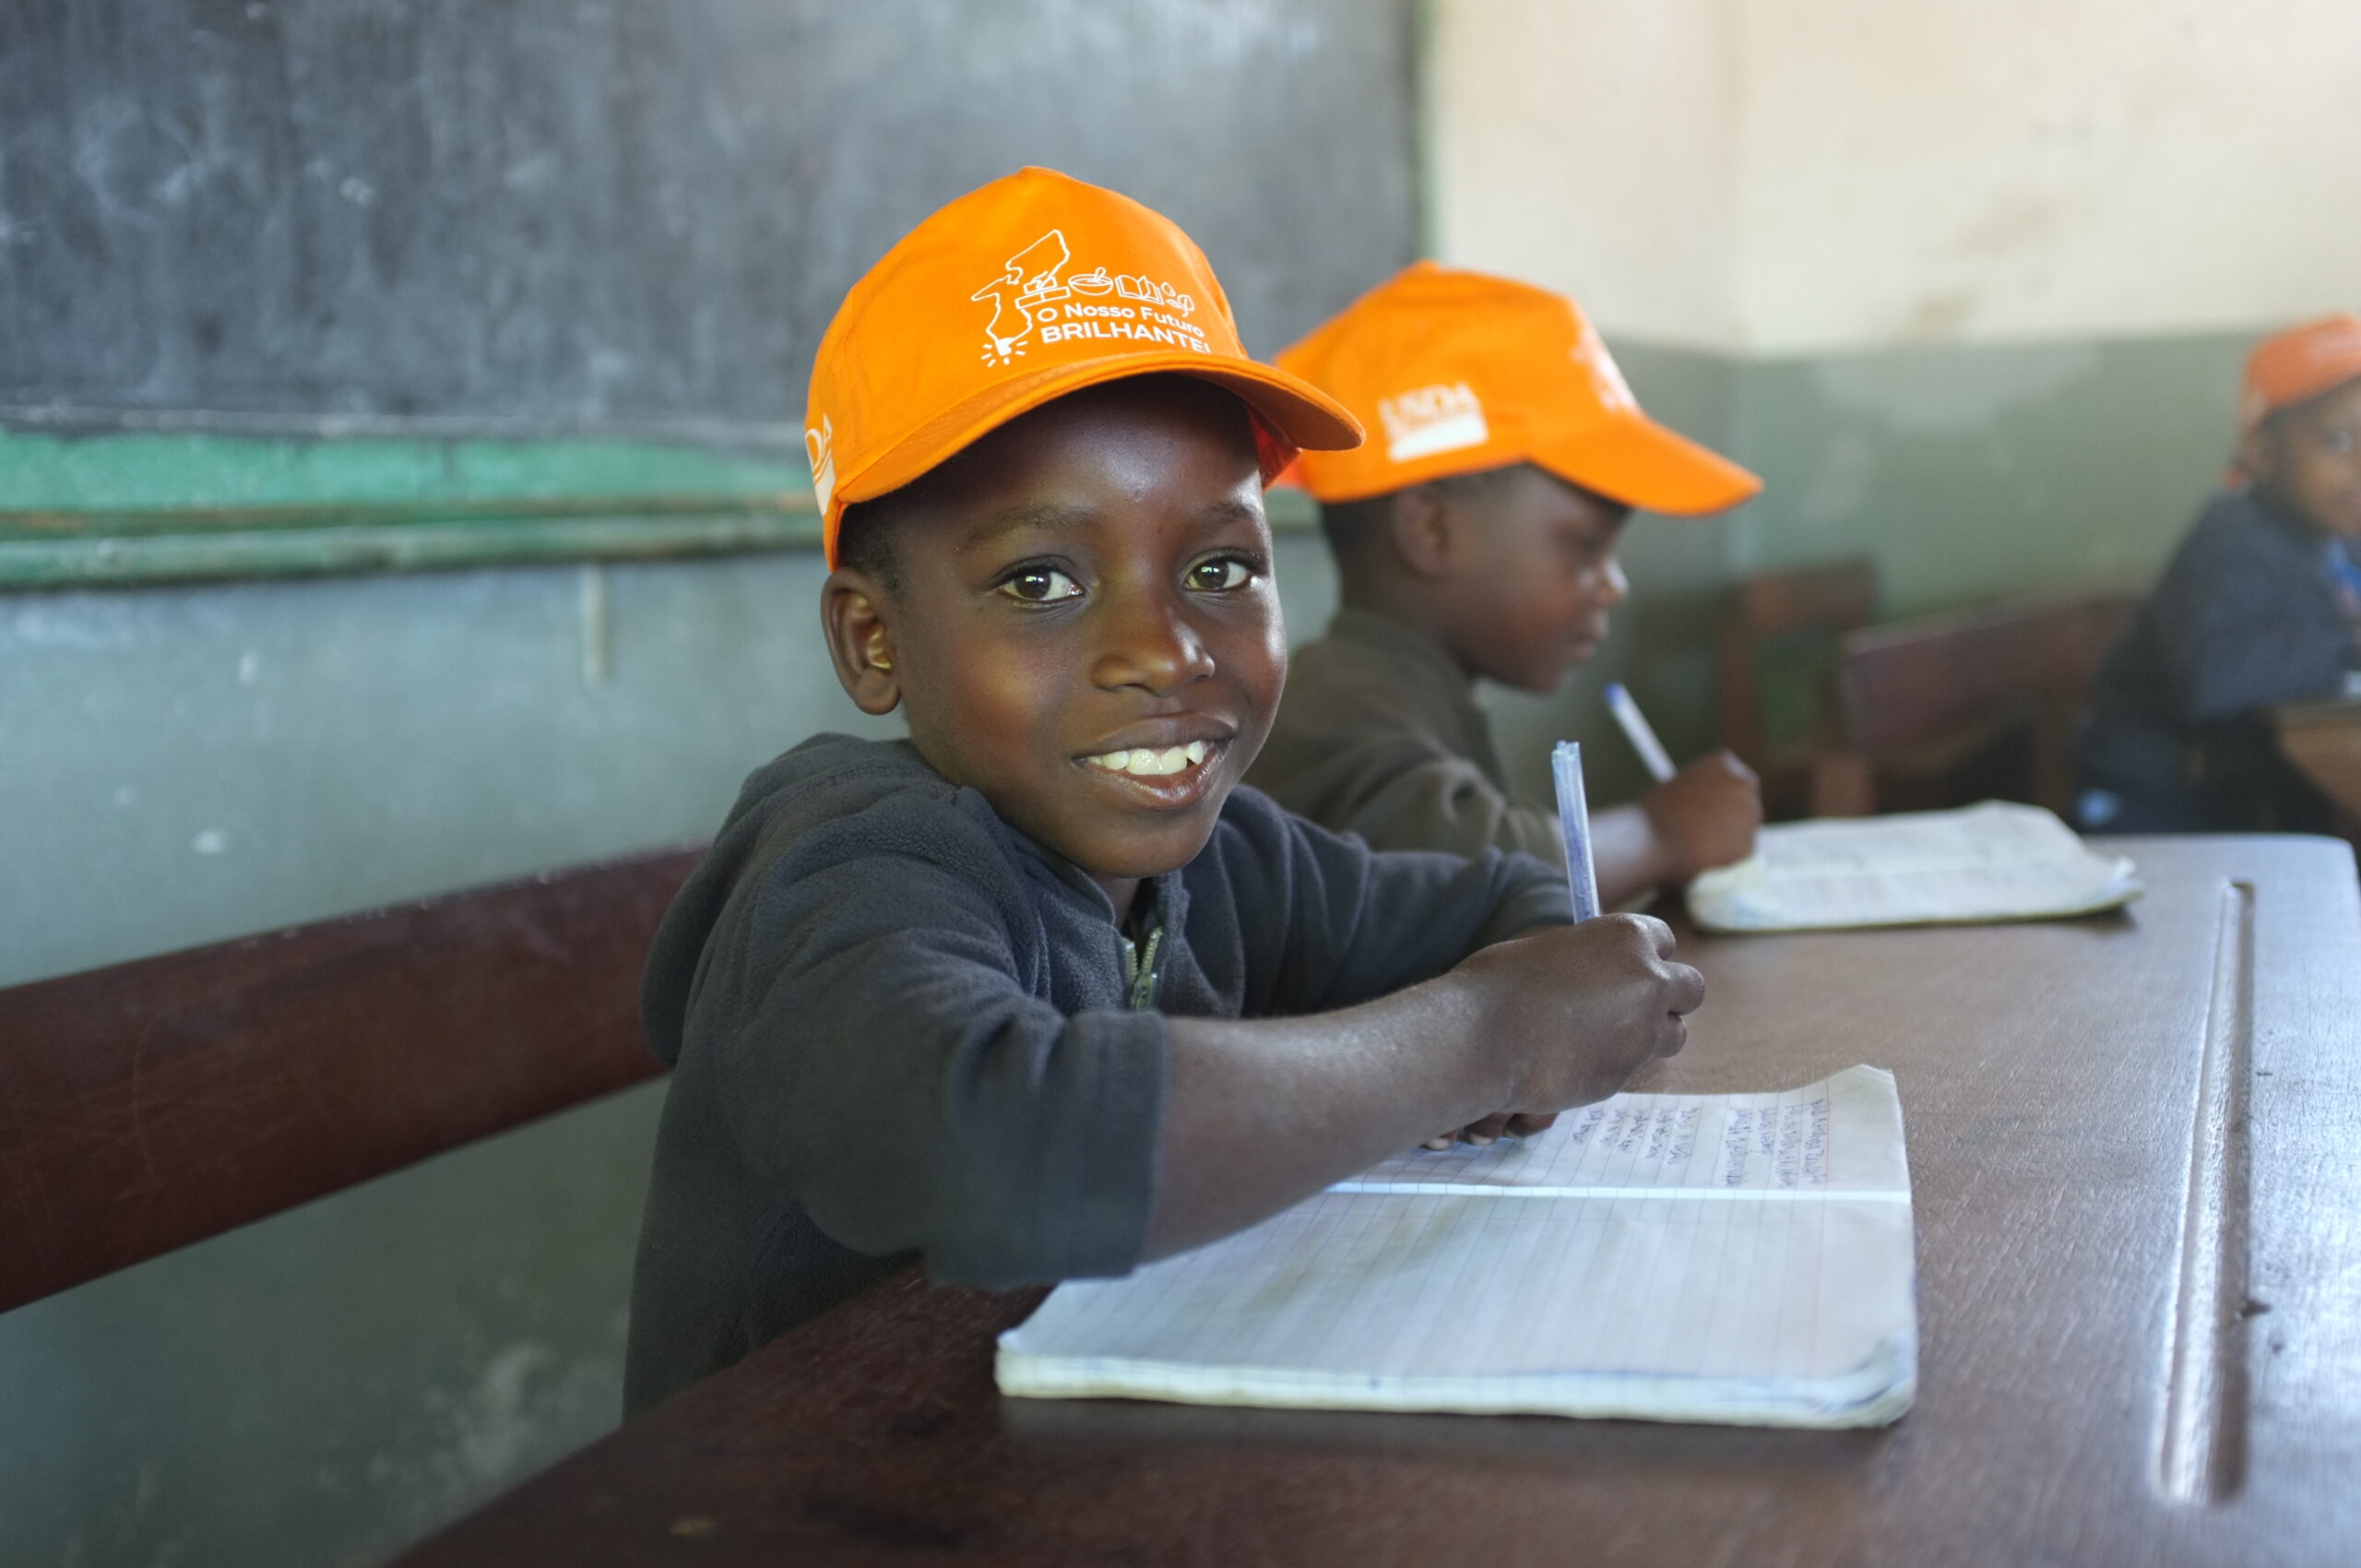 Primary school student in Matutuine, Mozambique practices his writing and reading skills.